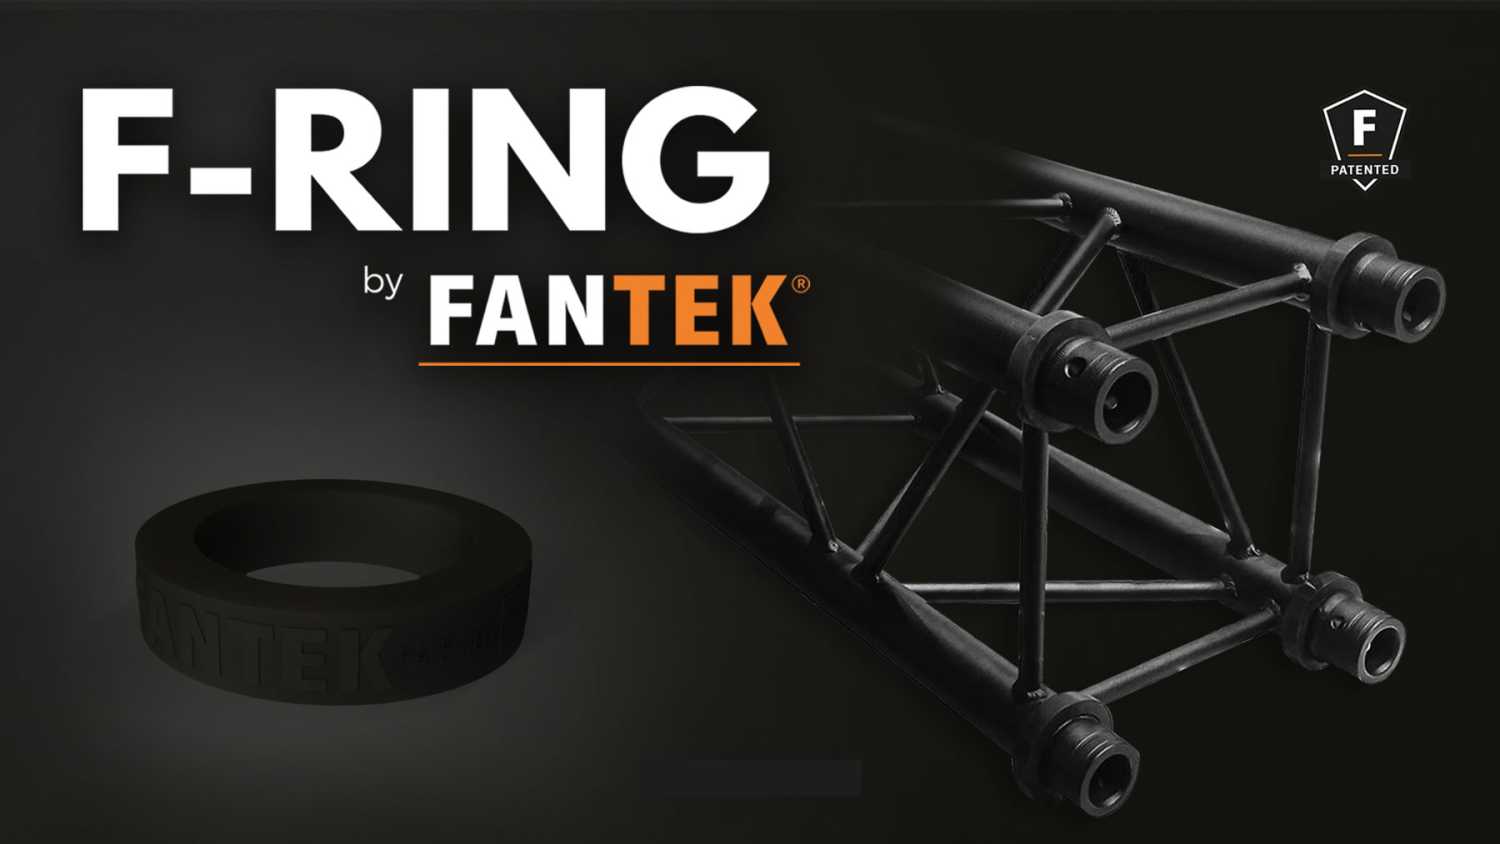 The Fantek Ring can be installed on trusses in a matter of minutes